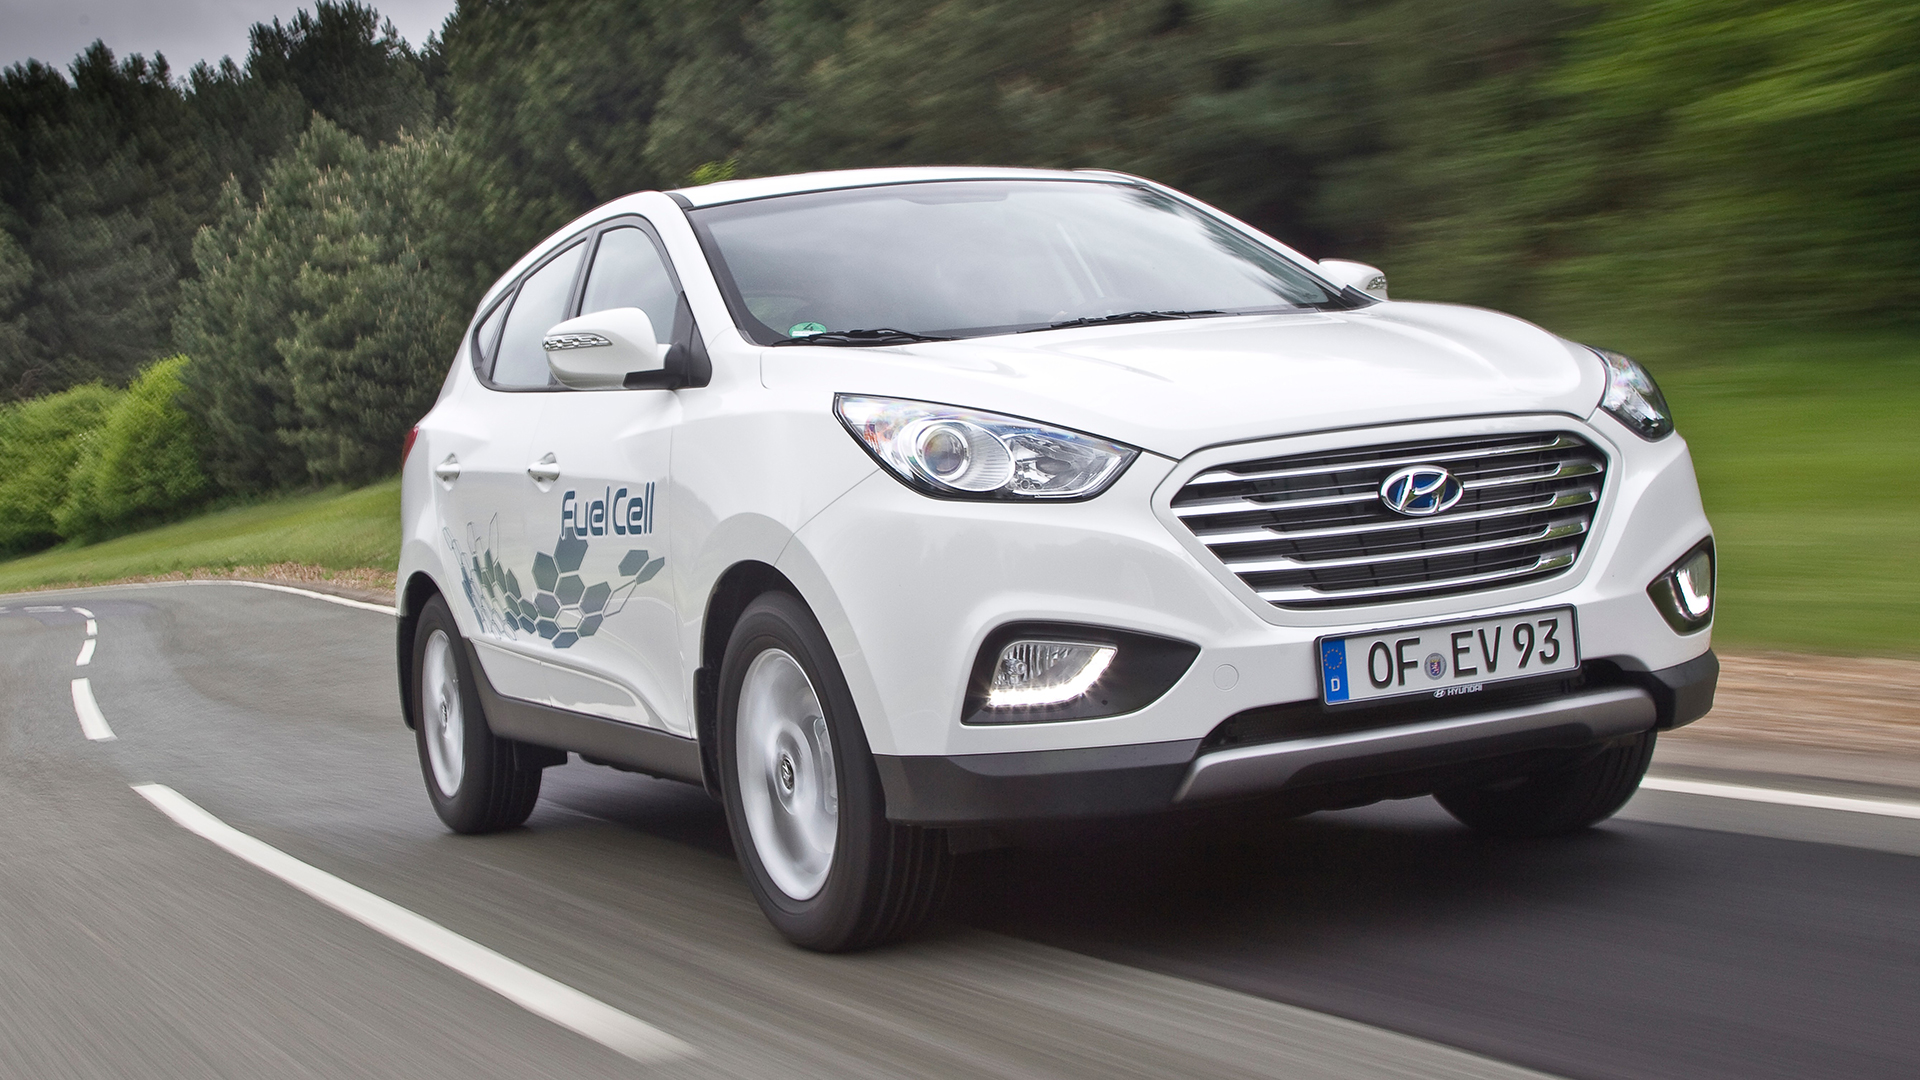 New & Used Hyundai Ix35 Cars For Sale | Autotrader